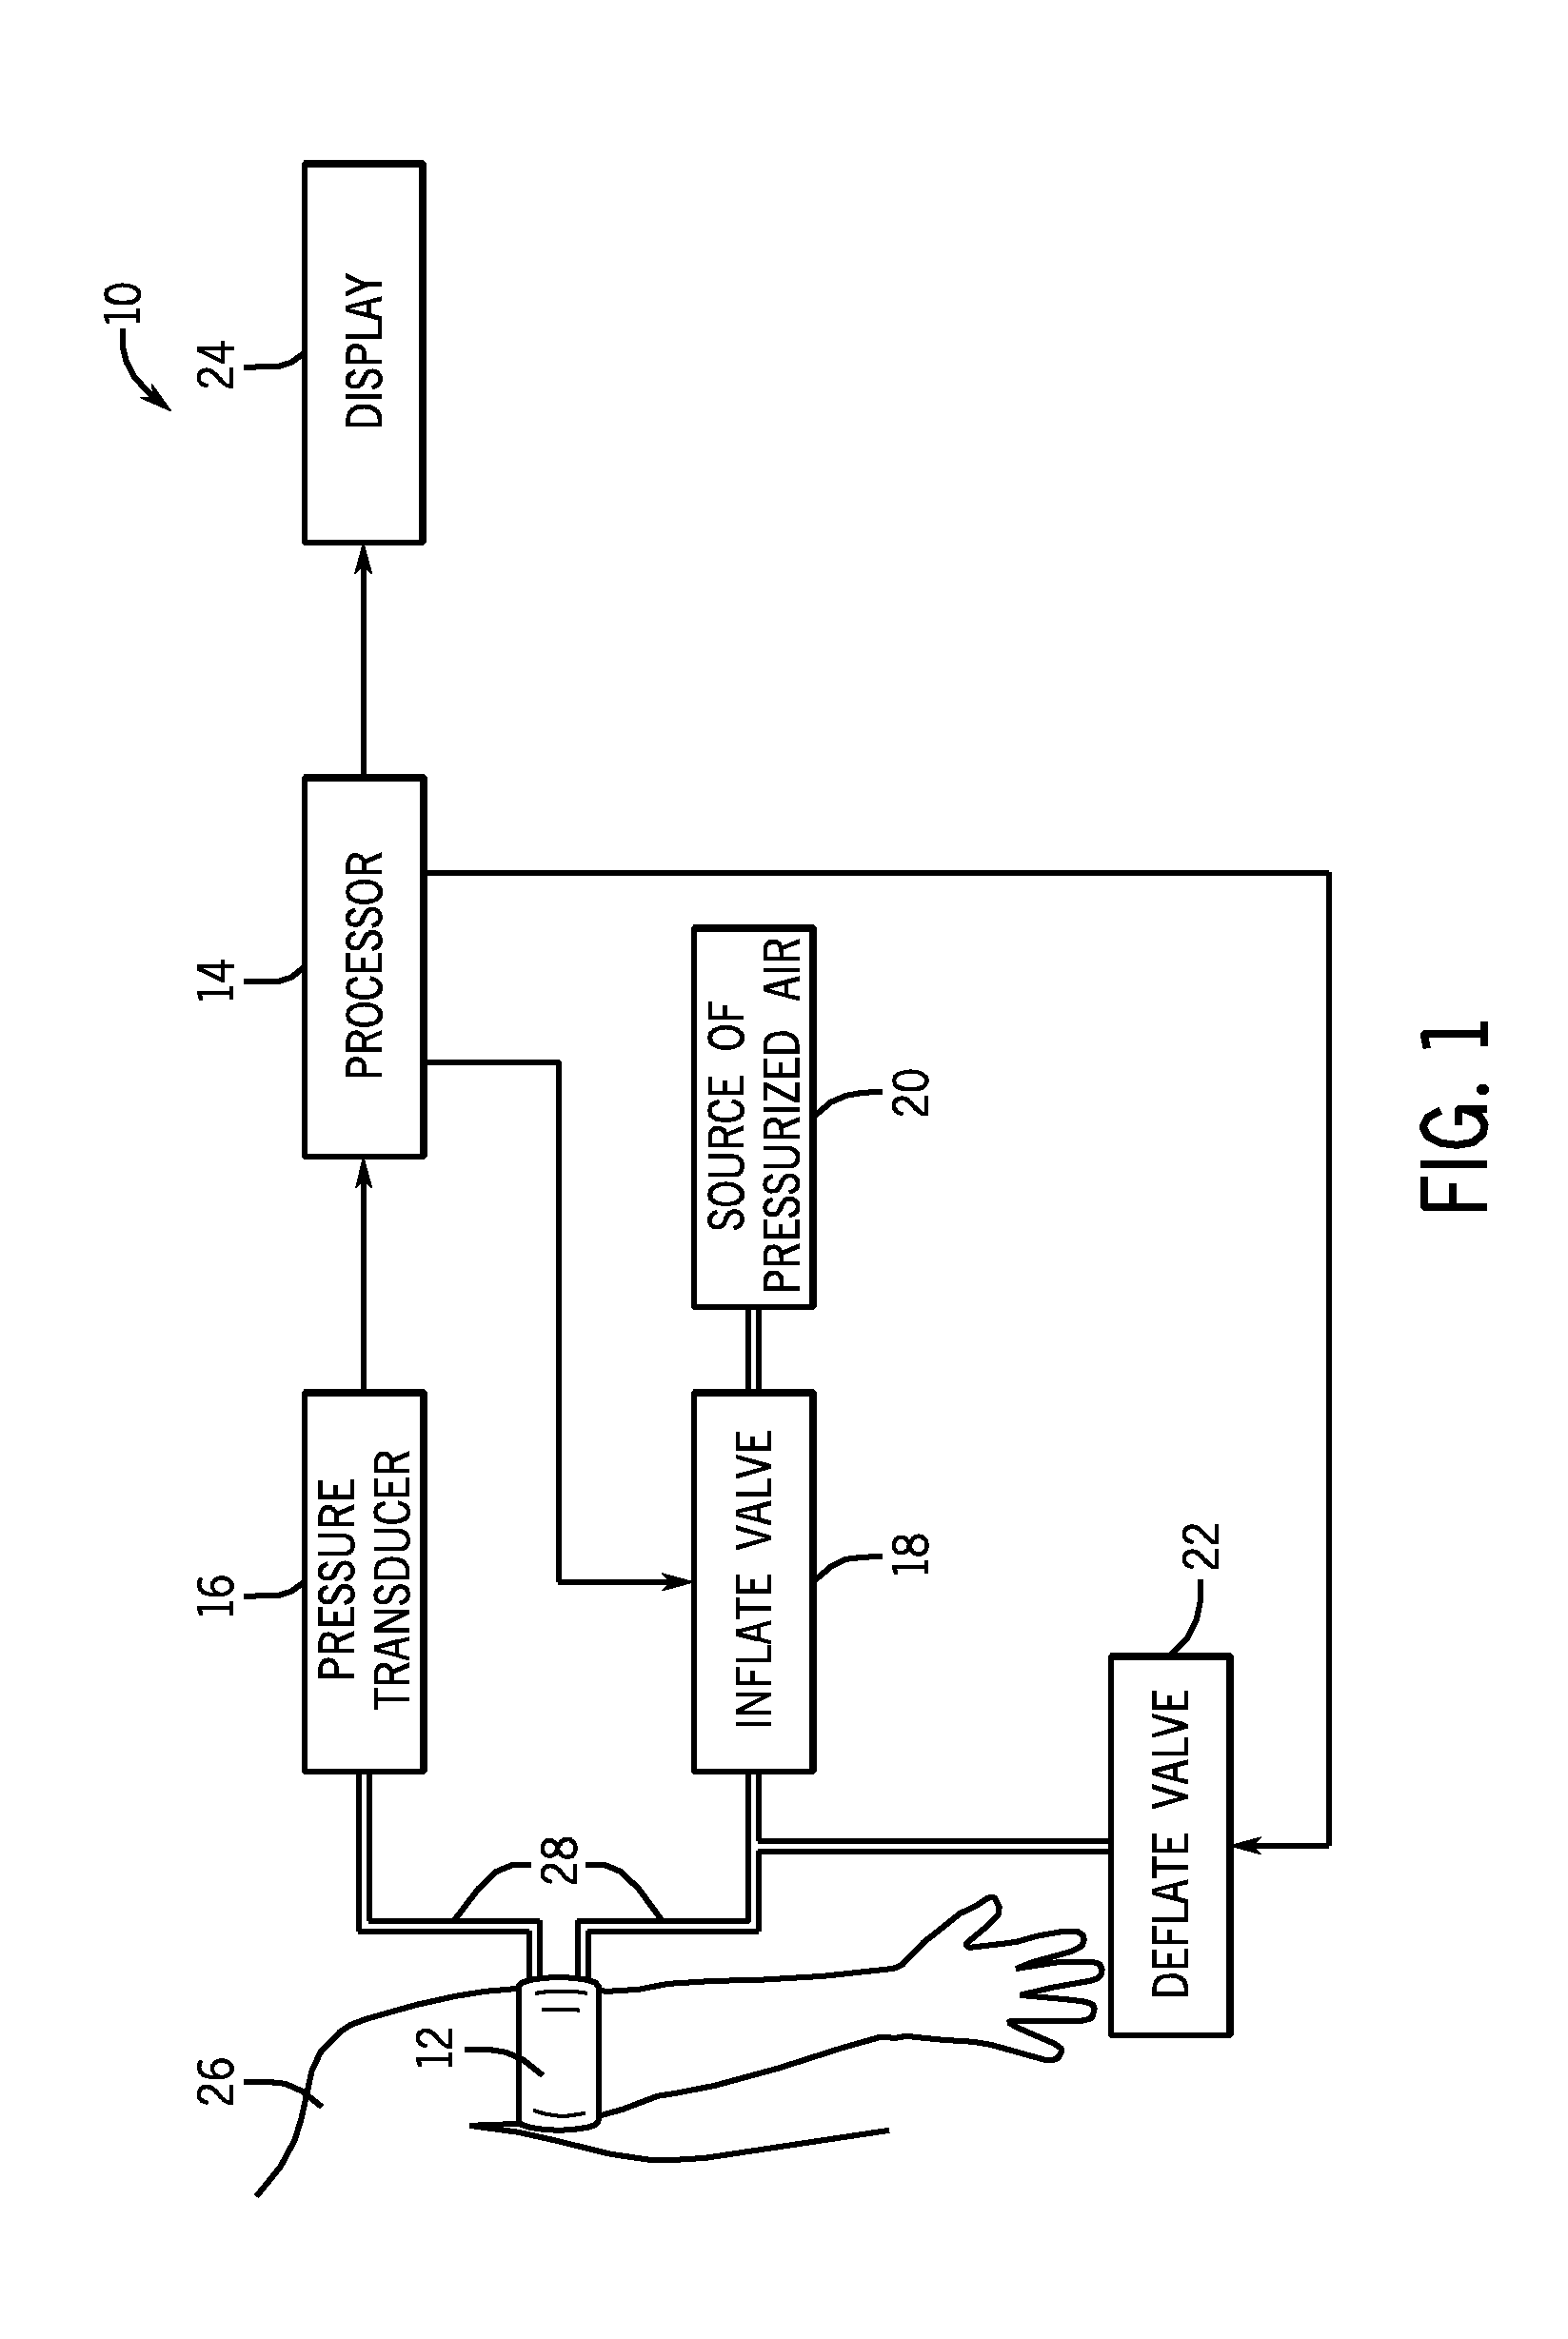 System and method for a non-invasive blood pressure monitor